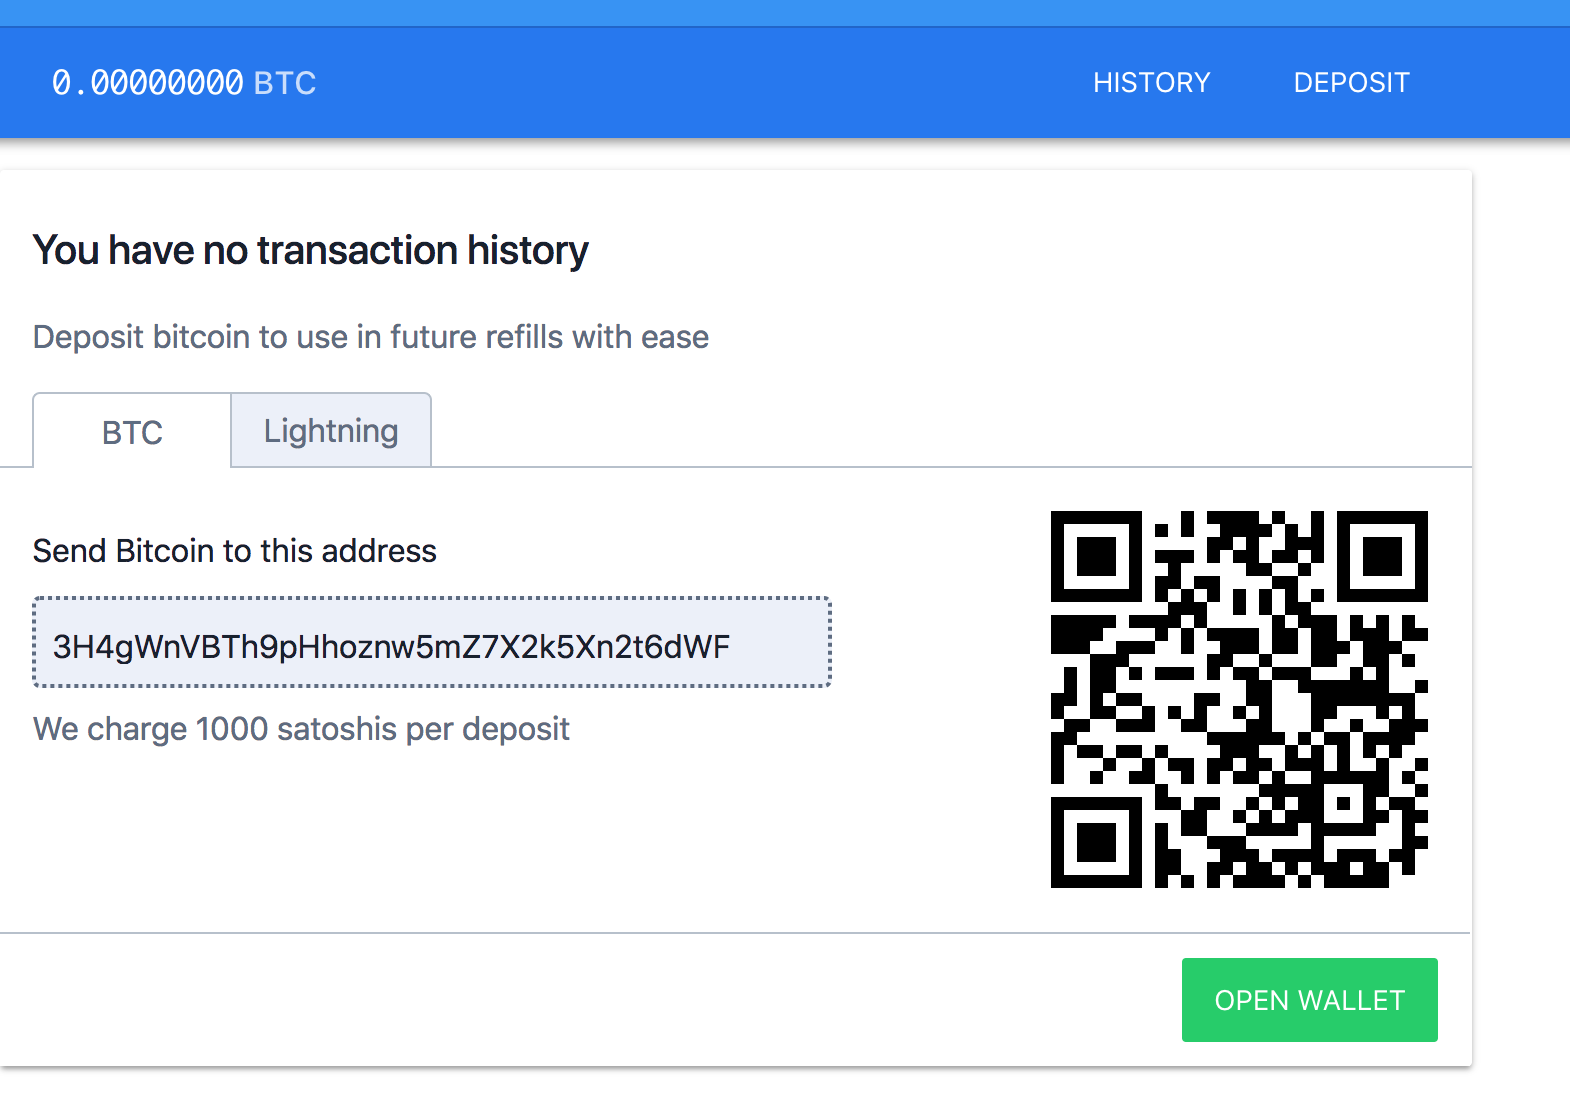 Receiving Transaction Signaling RBF - No incoming transactions show initially during original transaction. This delay could have been related to delays in relaying the transaction in the Bitcoin network.
